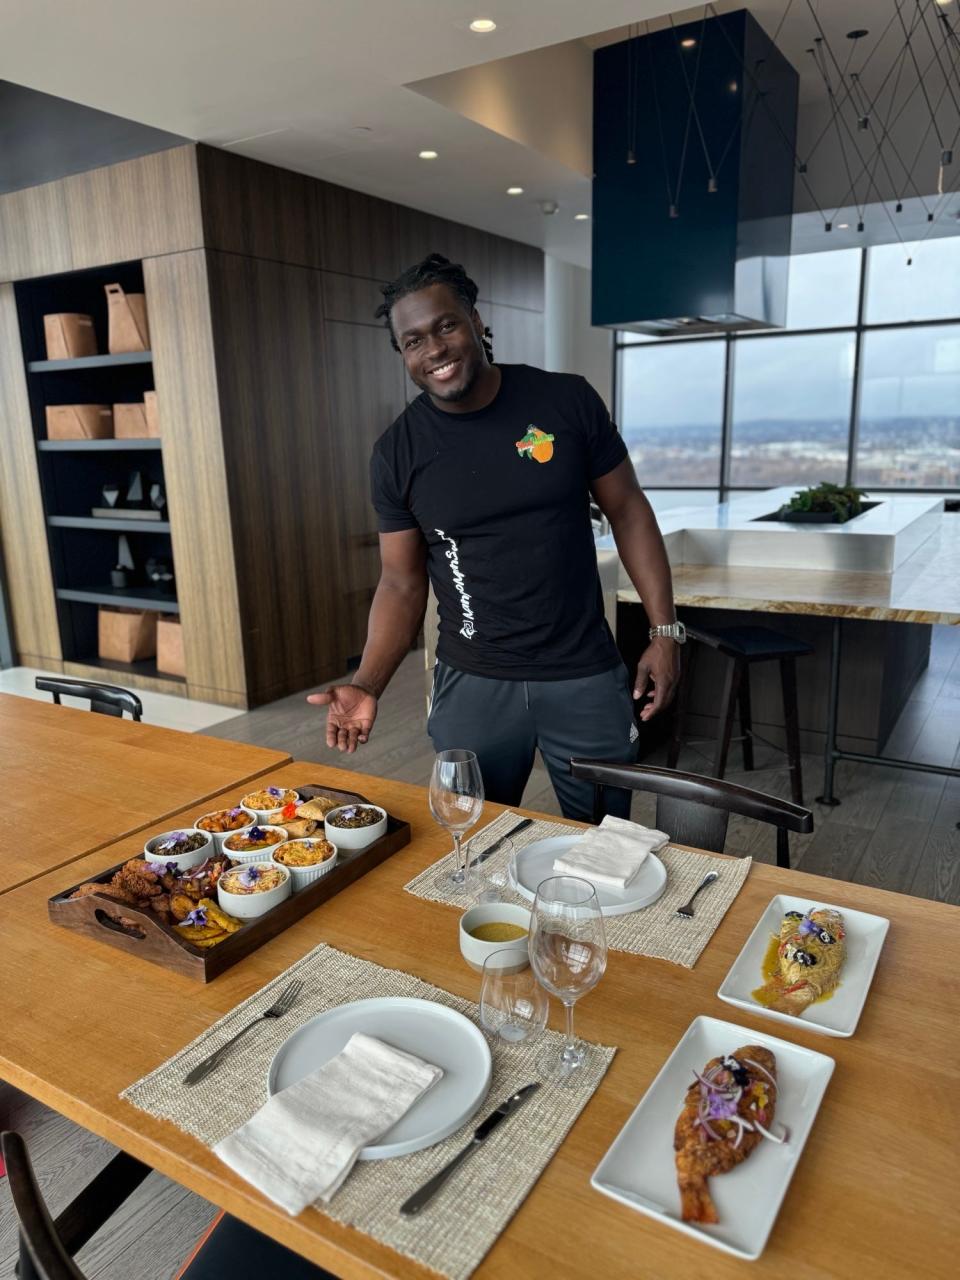 Kervin Edouard, owner of Swerv Catering, makes traditional Haitian dishes and delivers them to hundreds of Haitian migrants living in hotels in the Boston area.